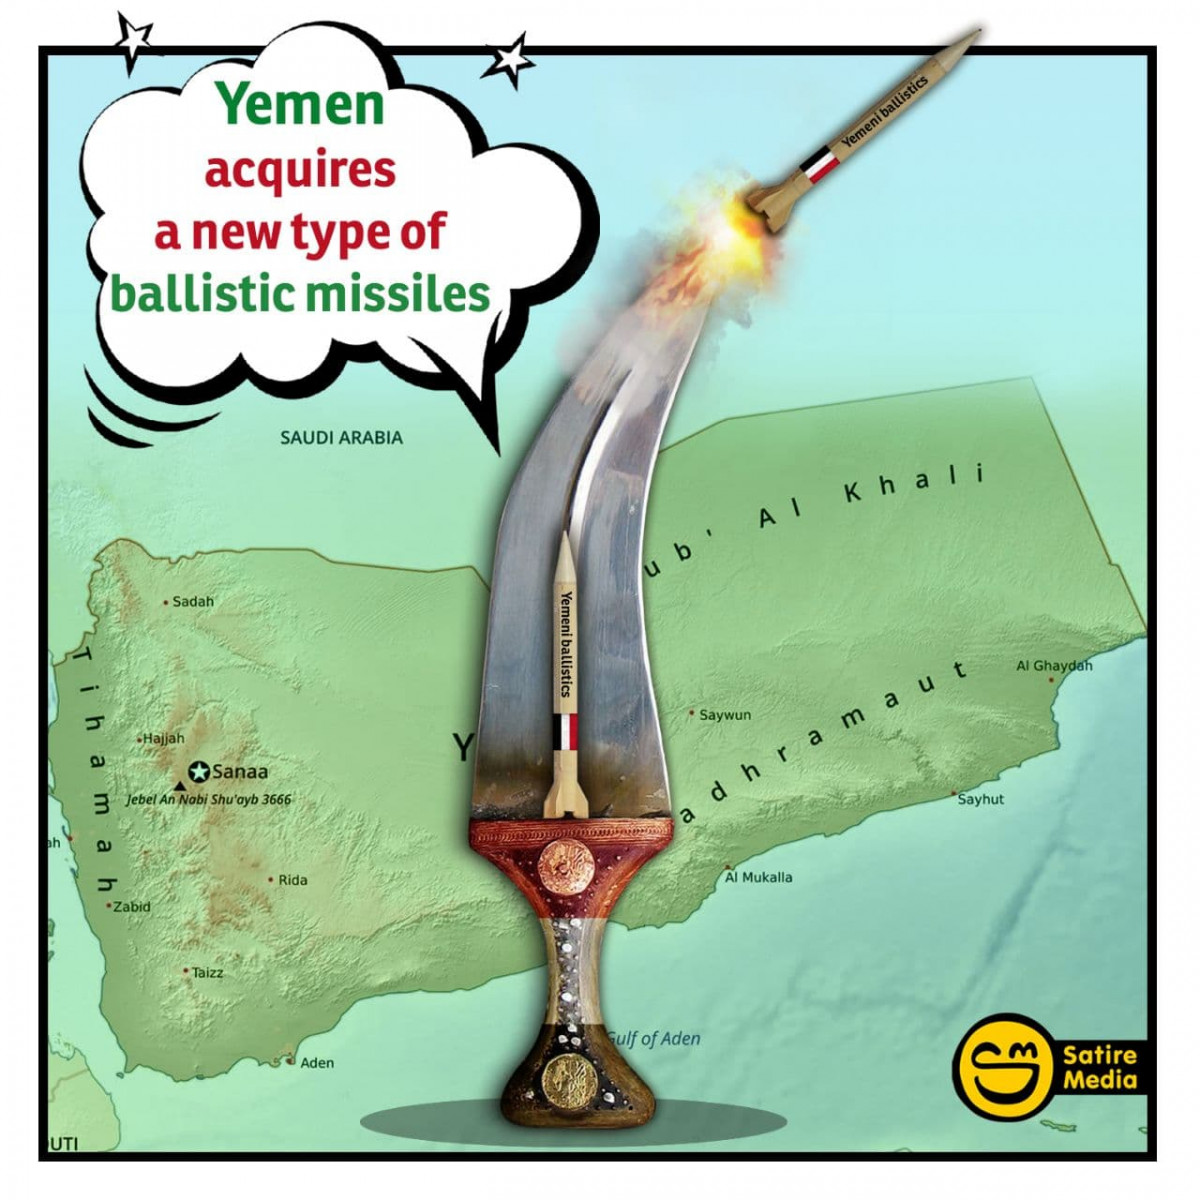 Yemen acquires a new type of ballistic missiles